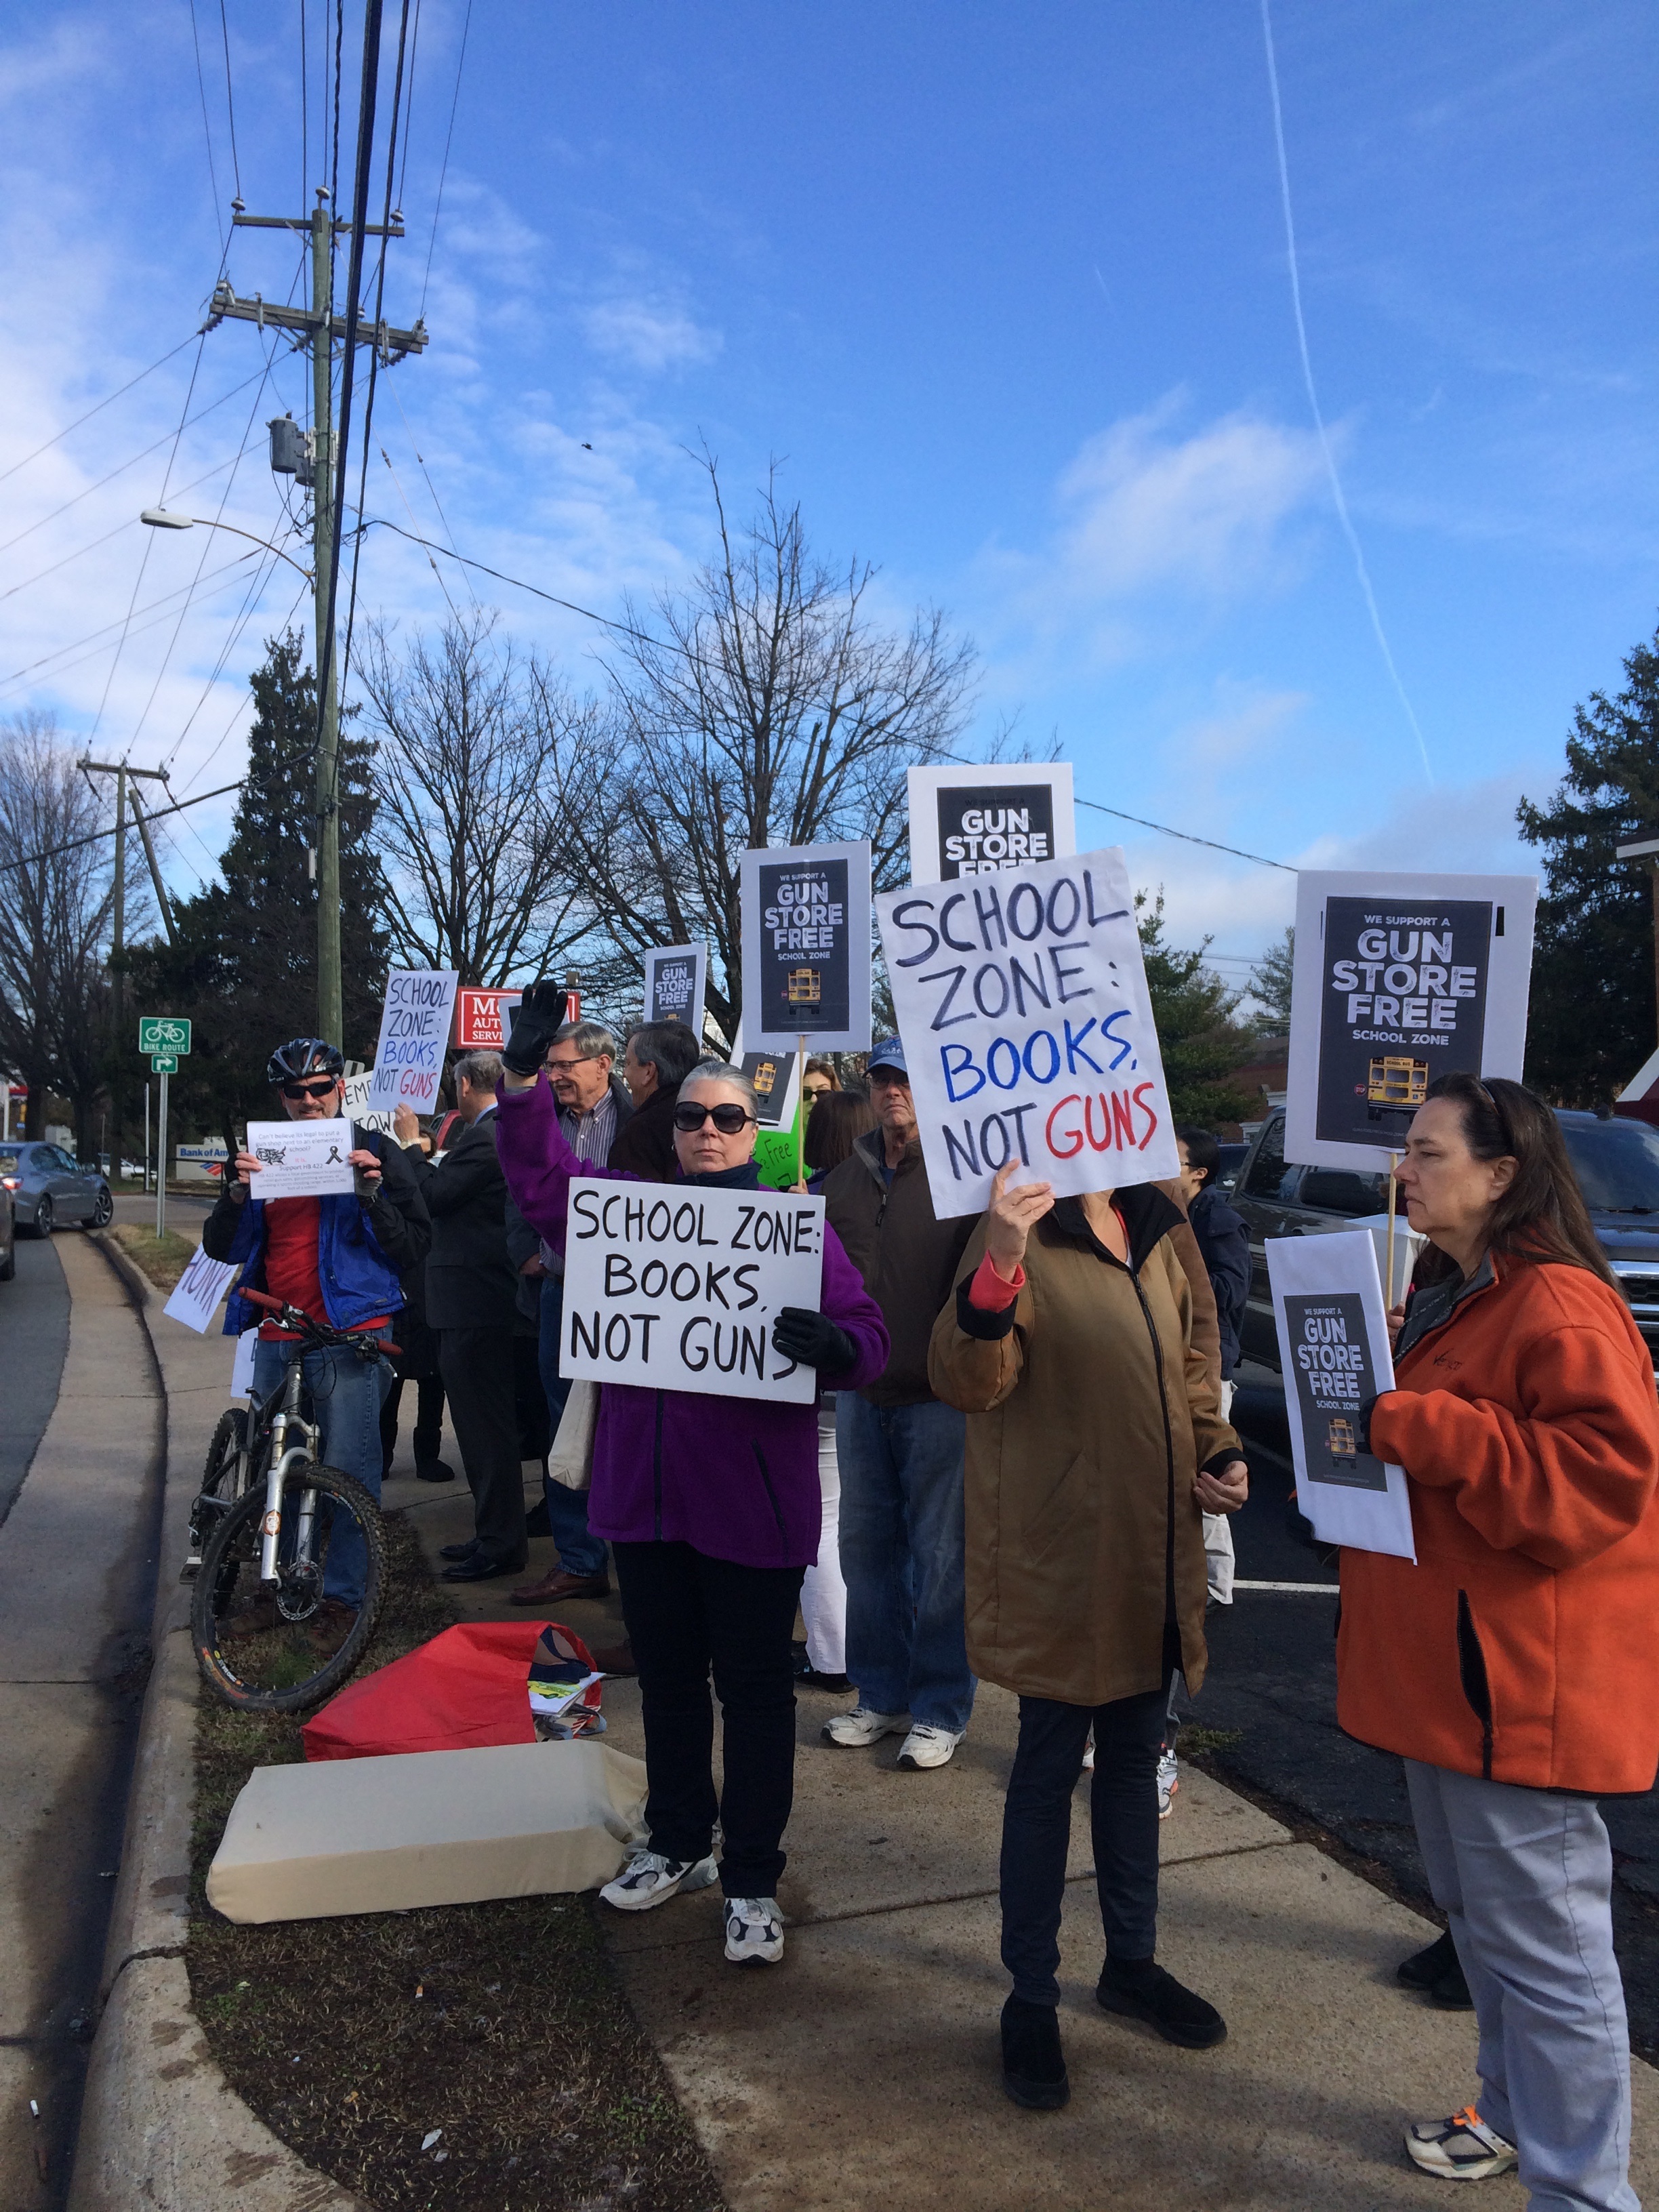 New gun shop sparks protests in McLean